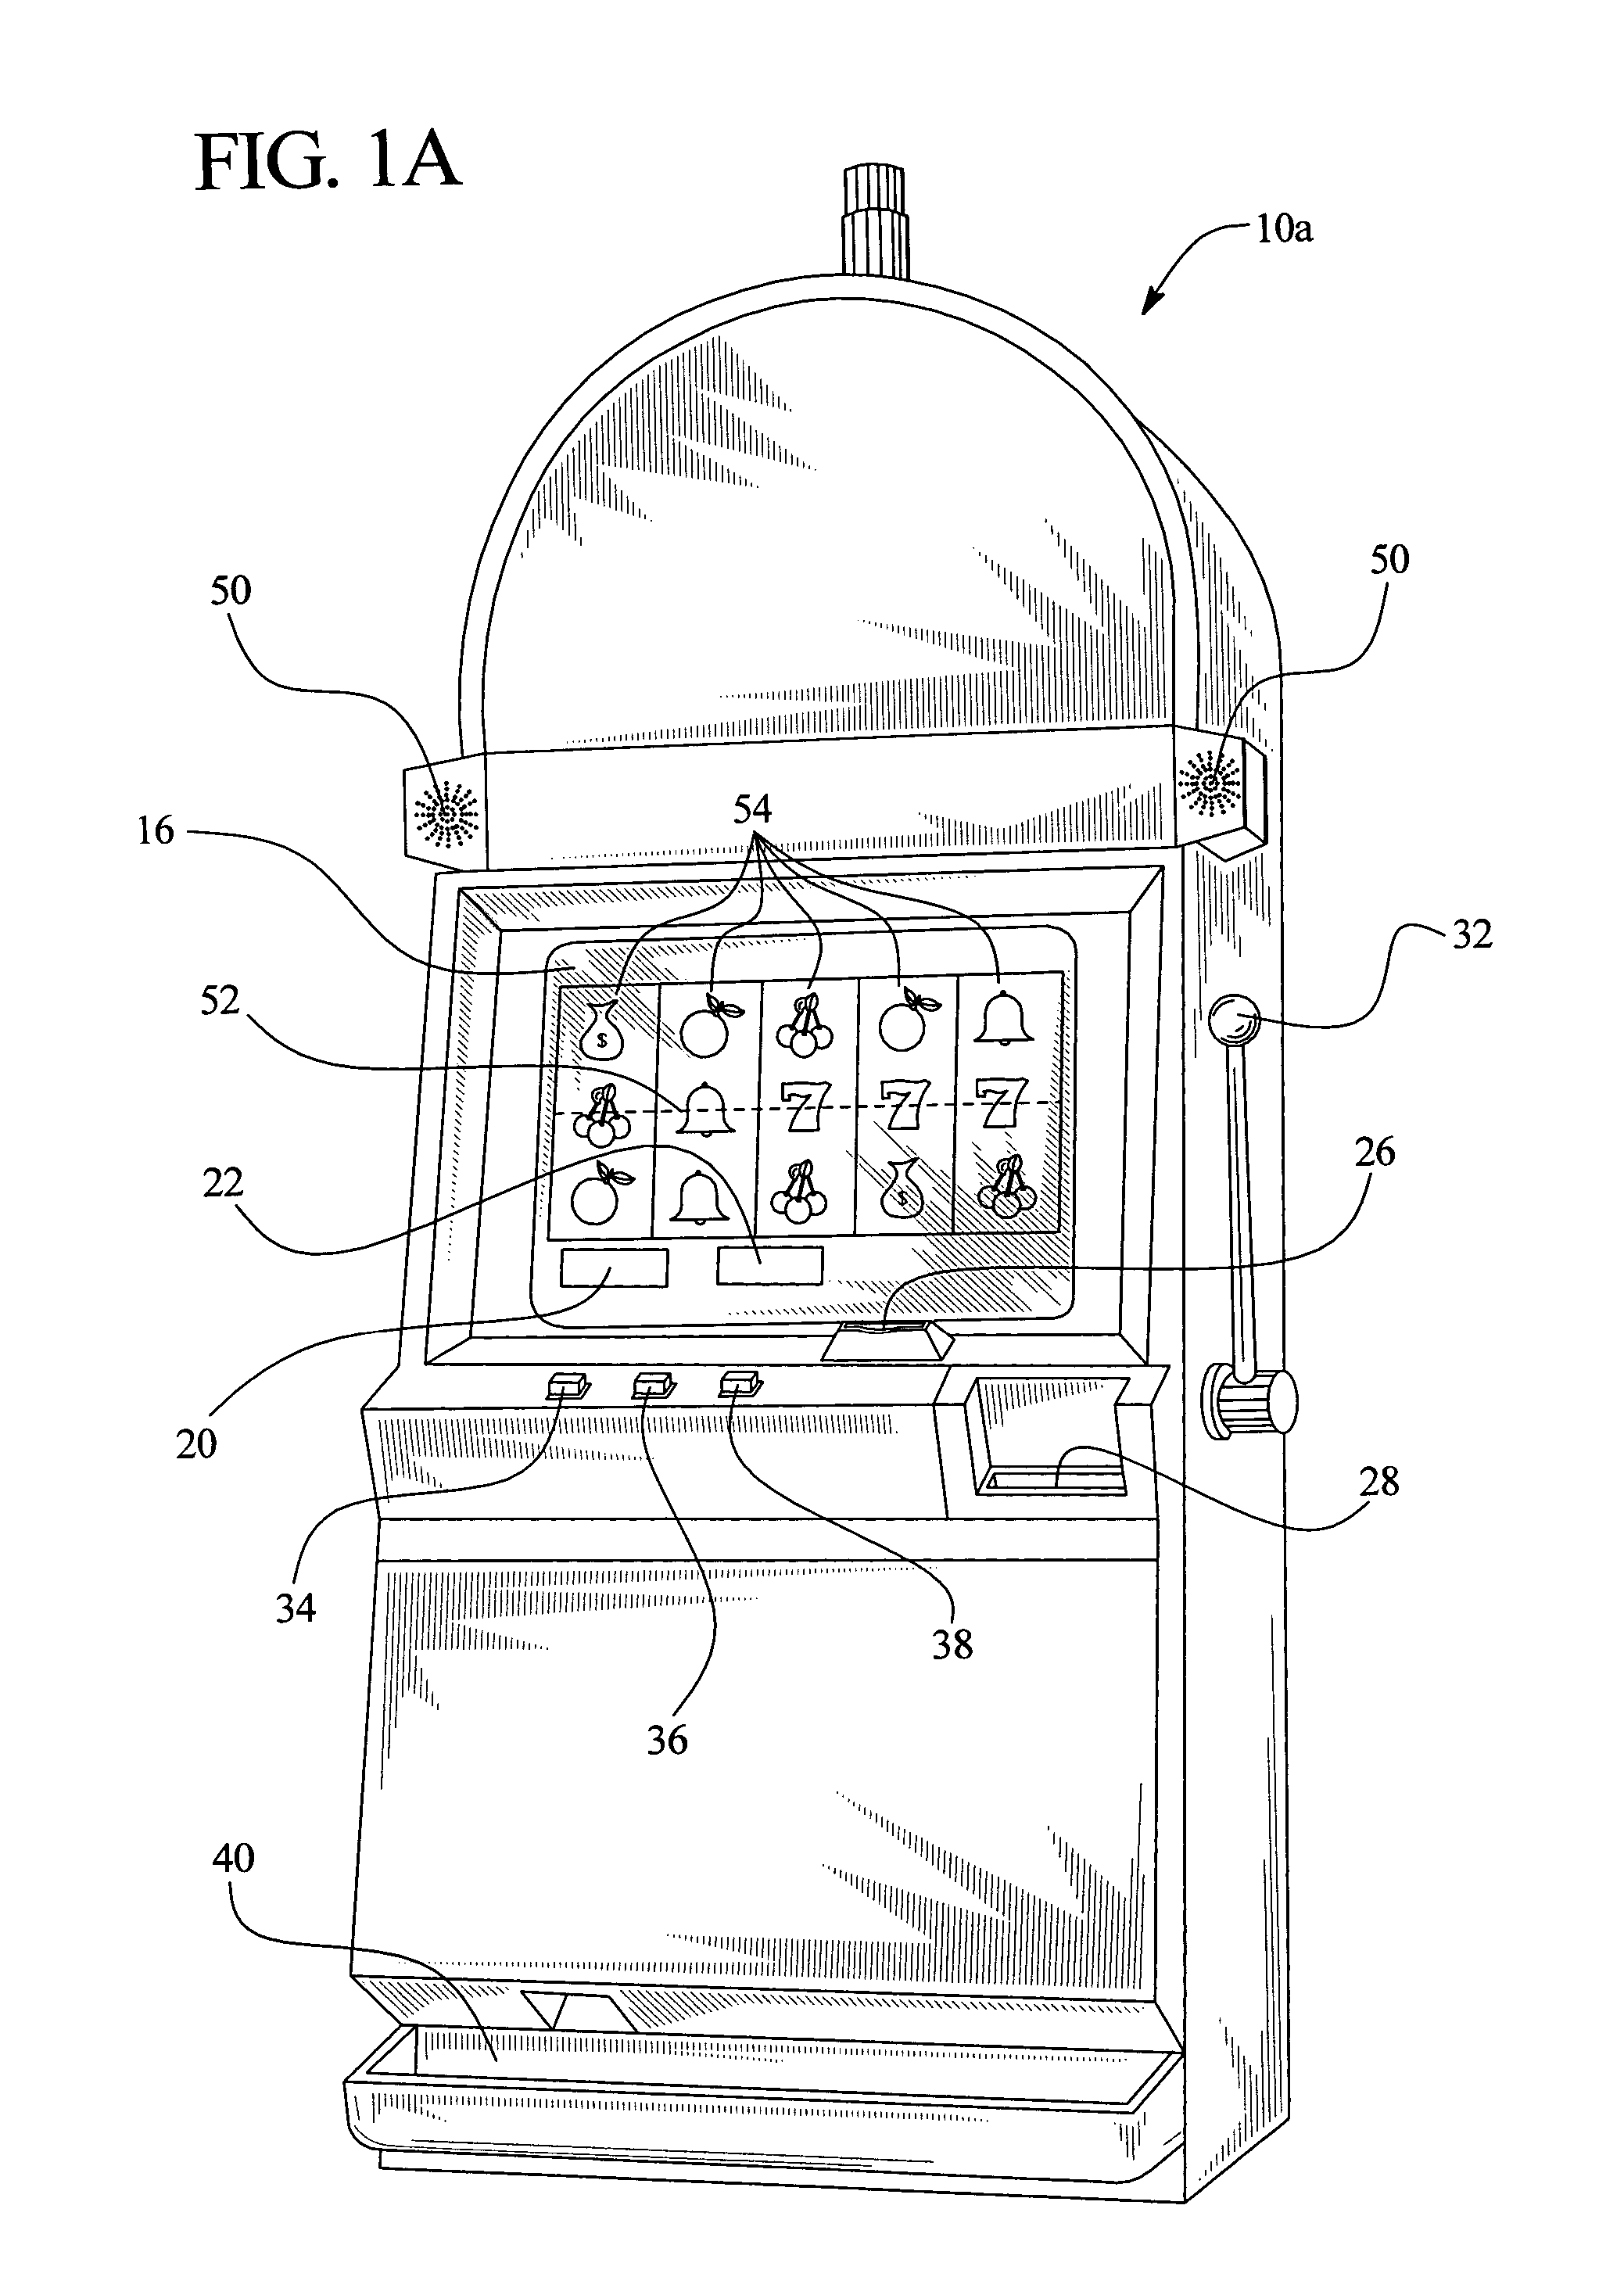 Gaming device having a system for dynamically aligning background music with play session events